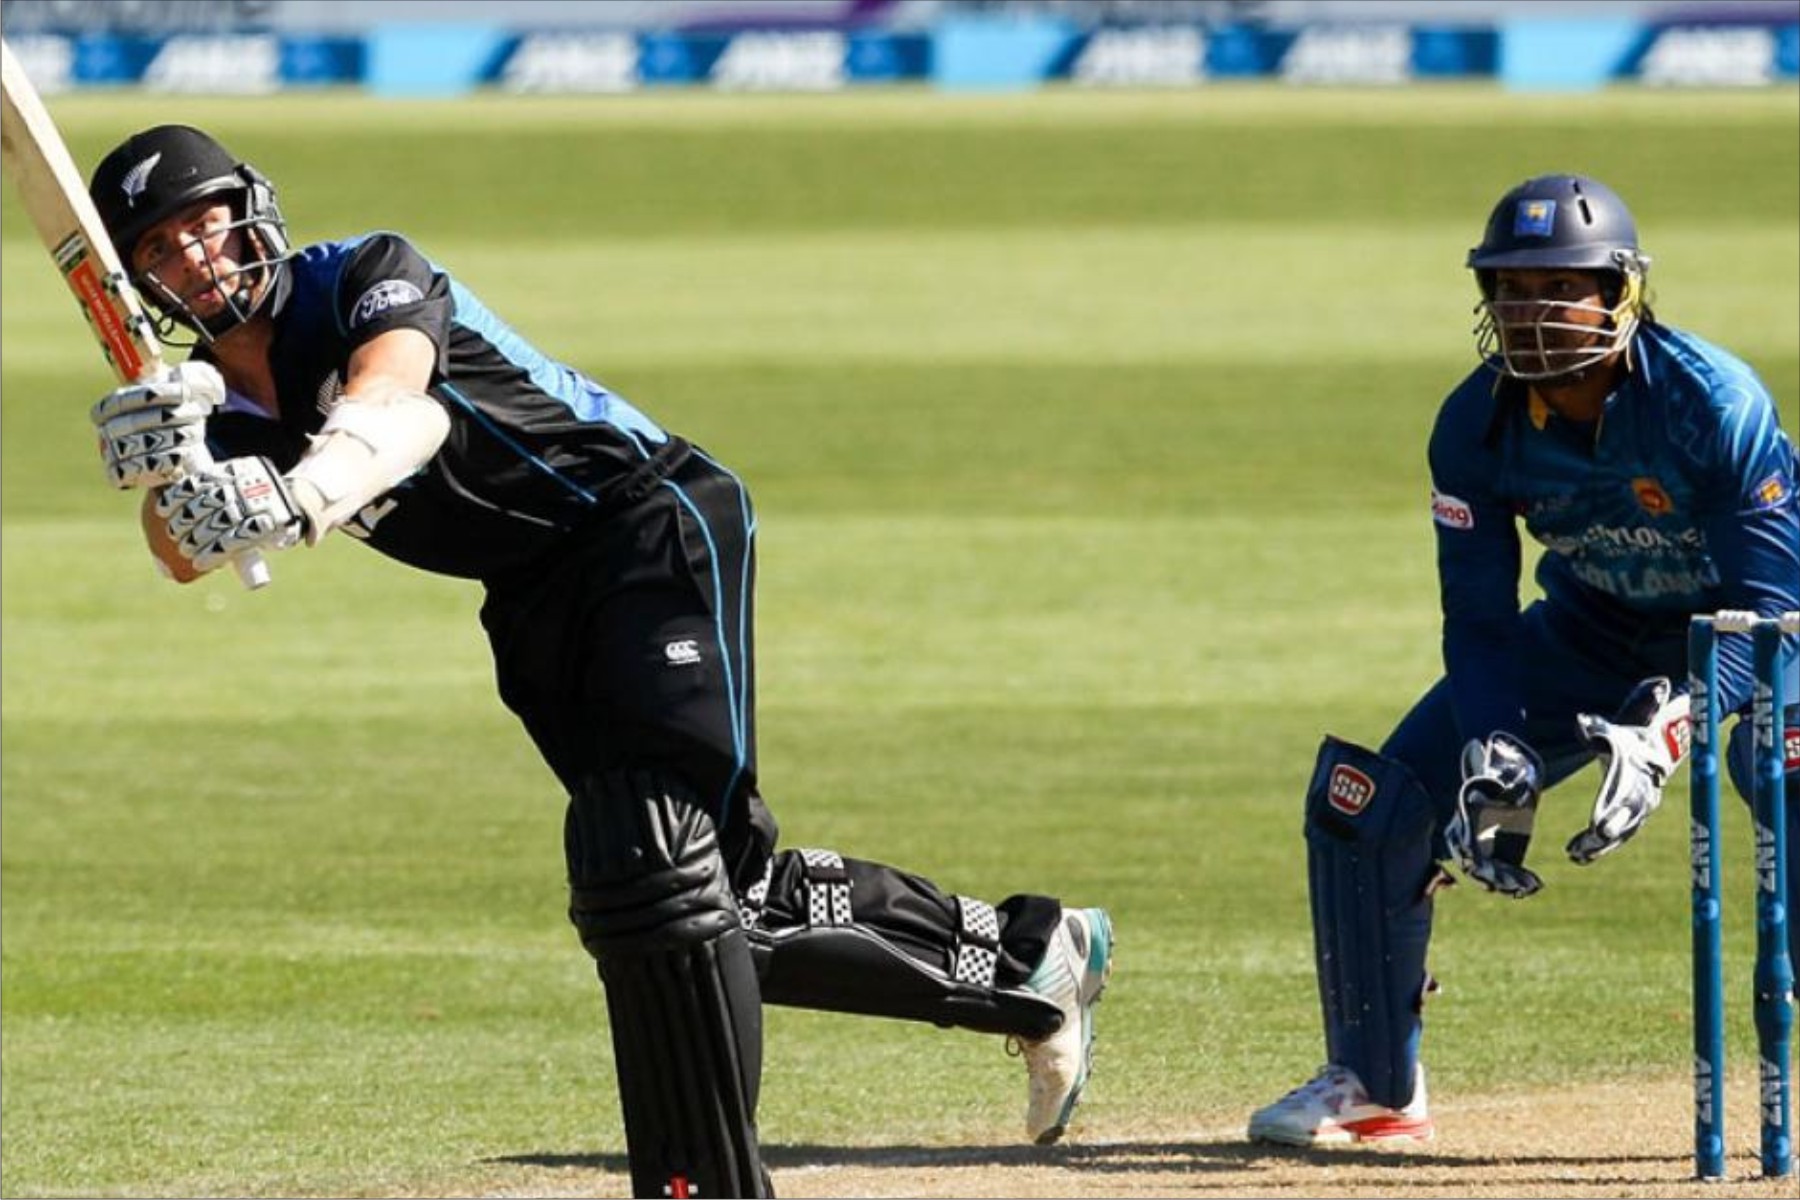 New Zealand wins by 98 in World Cup opener